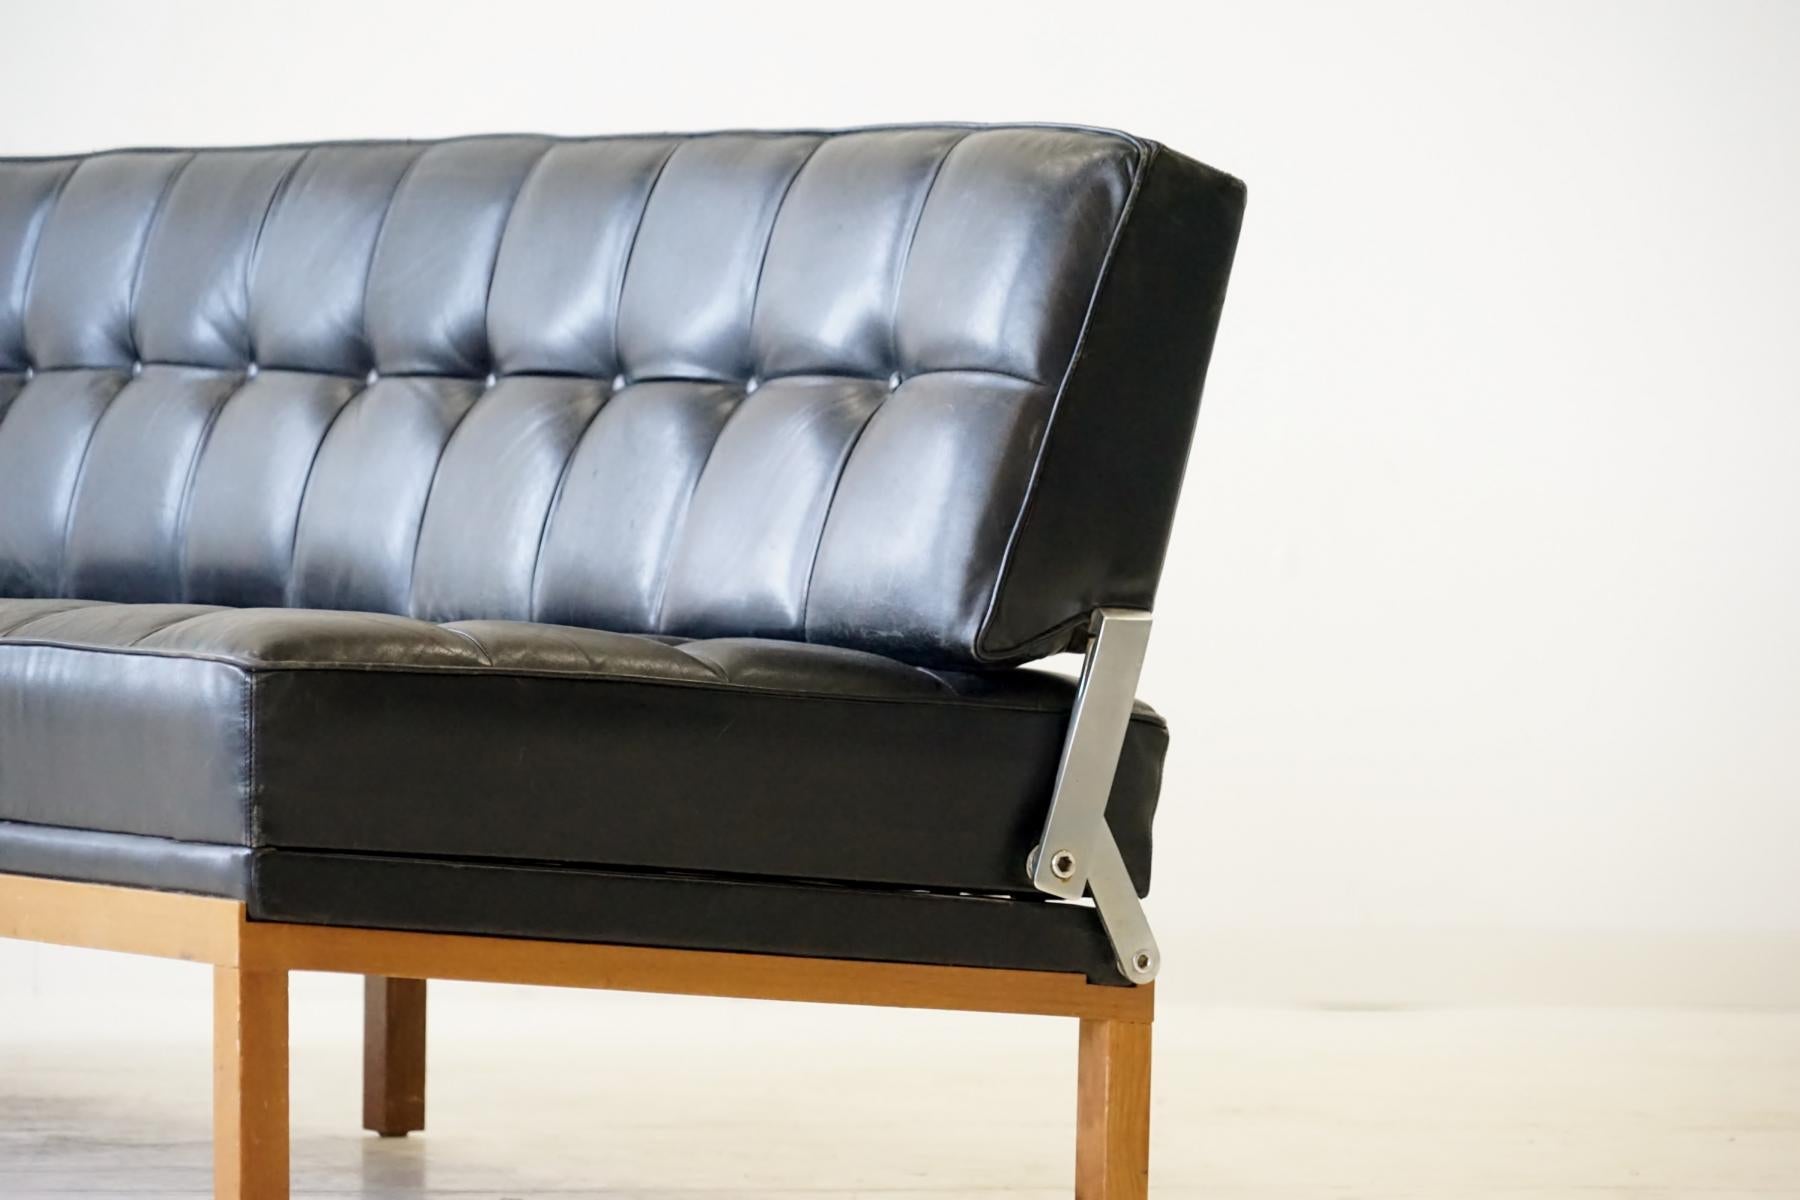 Mid-Century Modern Sofa / Daybed Constance by Johannes Spalt for Wittmann, 1961